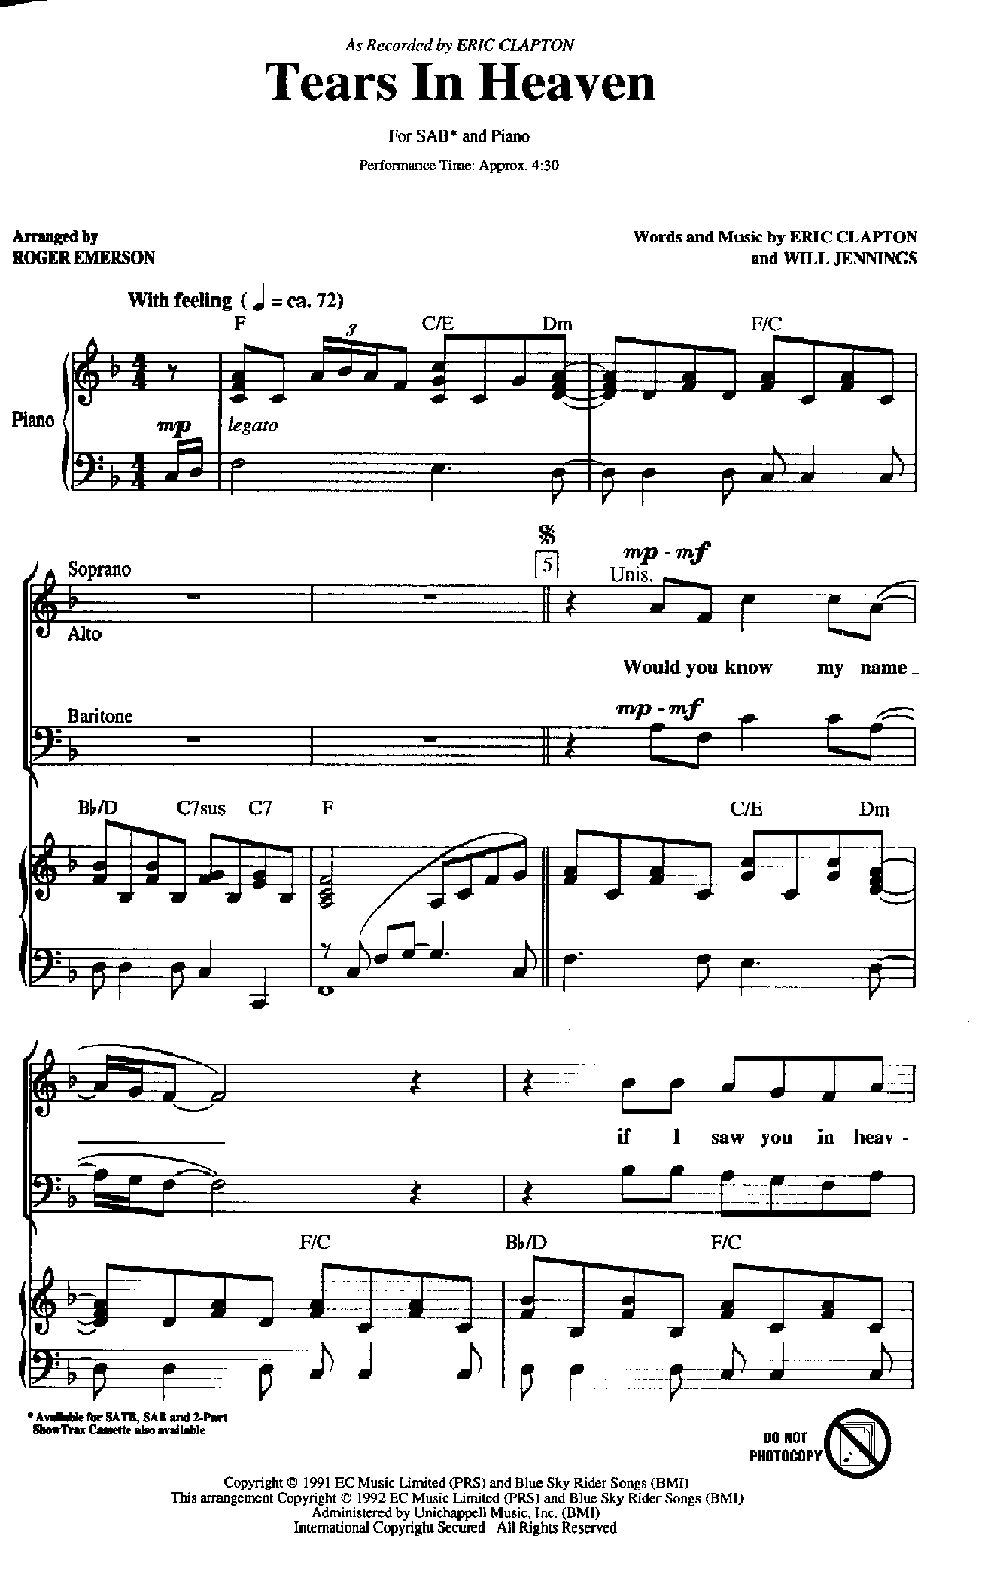 Tears In Heaven Sheet Music Preview Page 1  Tears in heaven, Sheet music,  Heaven music